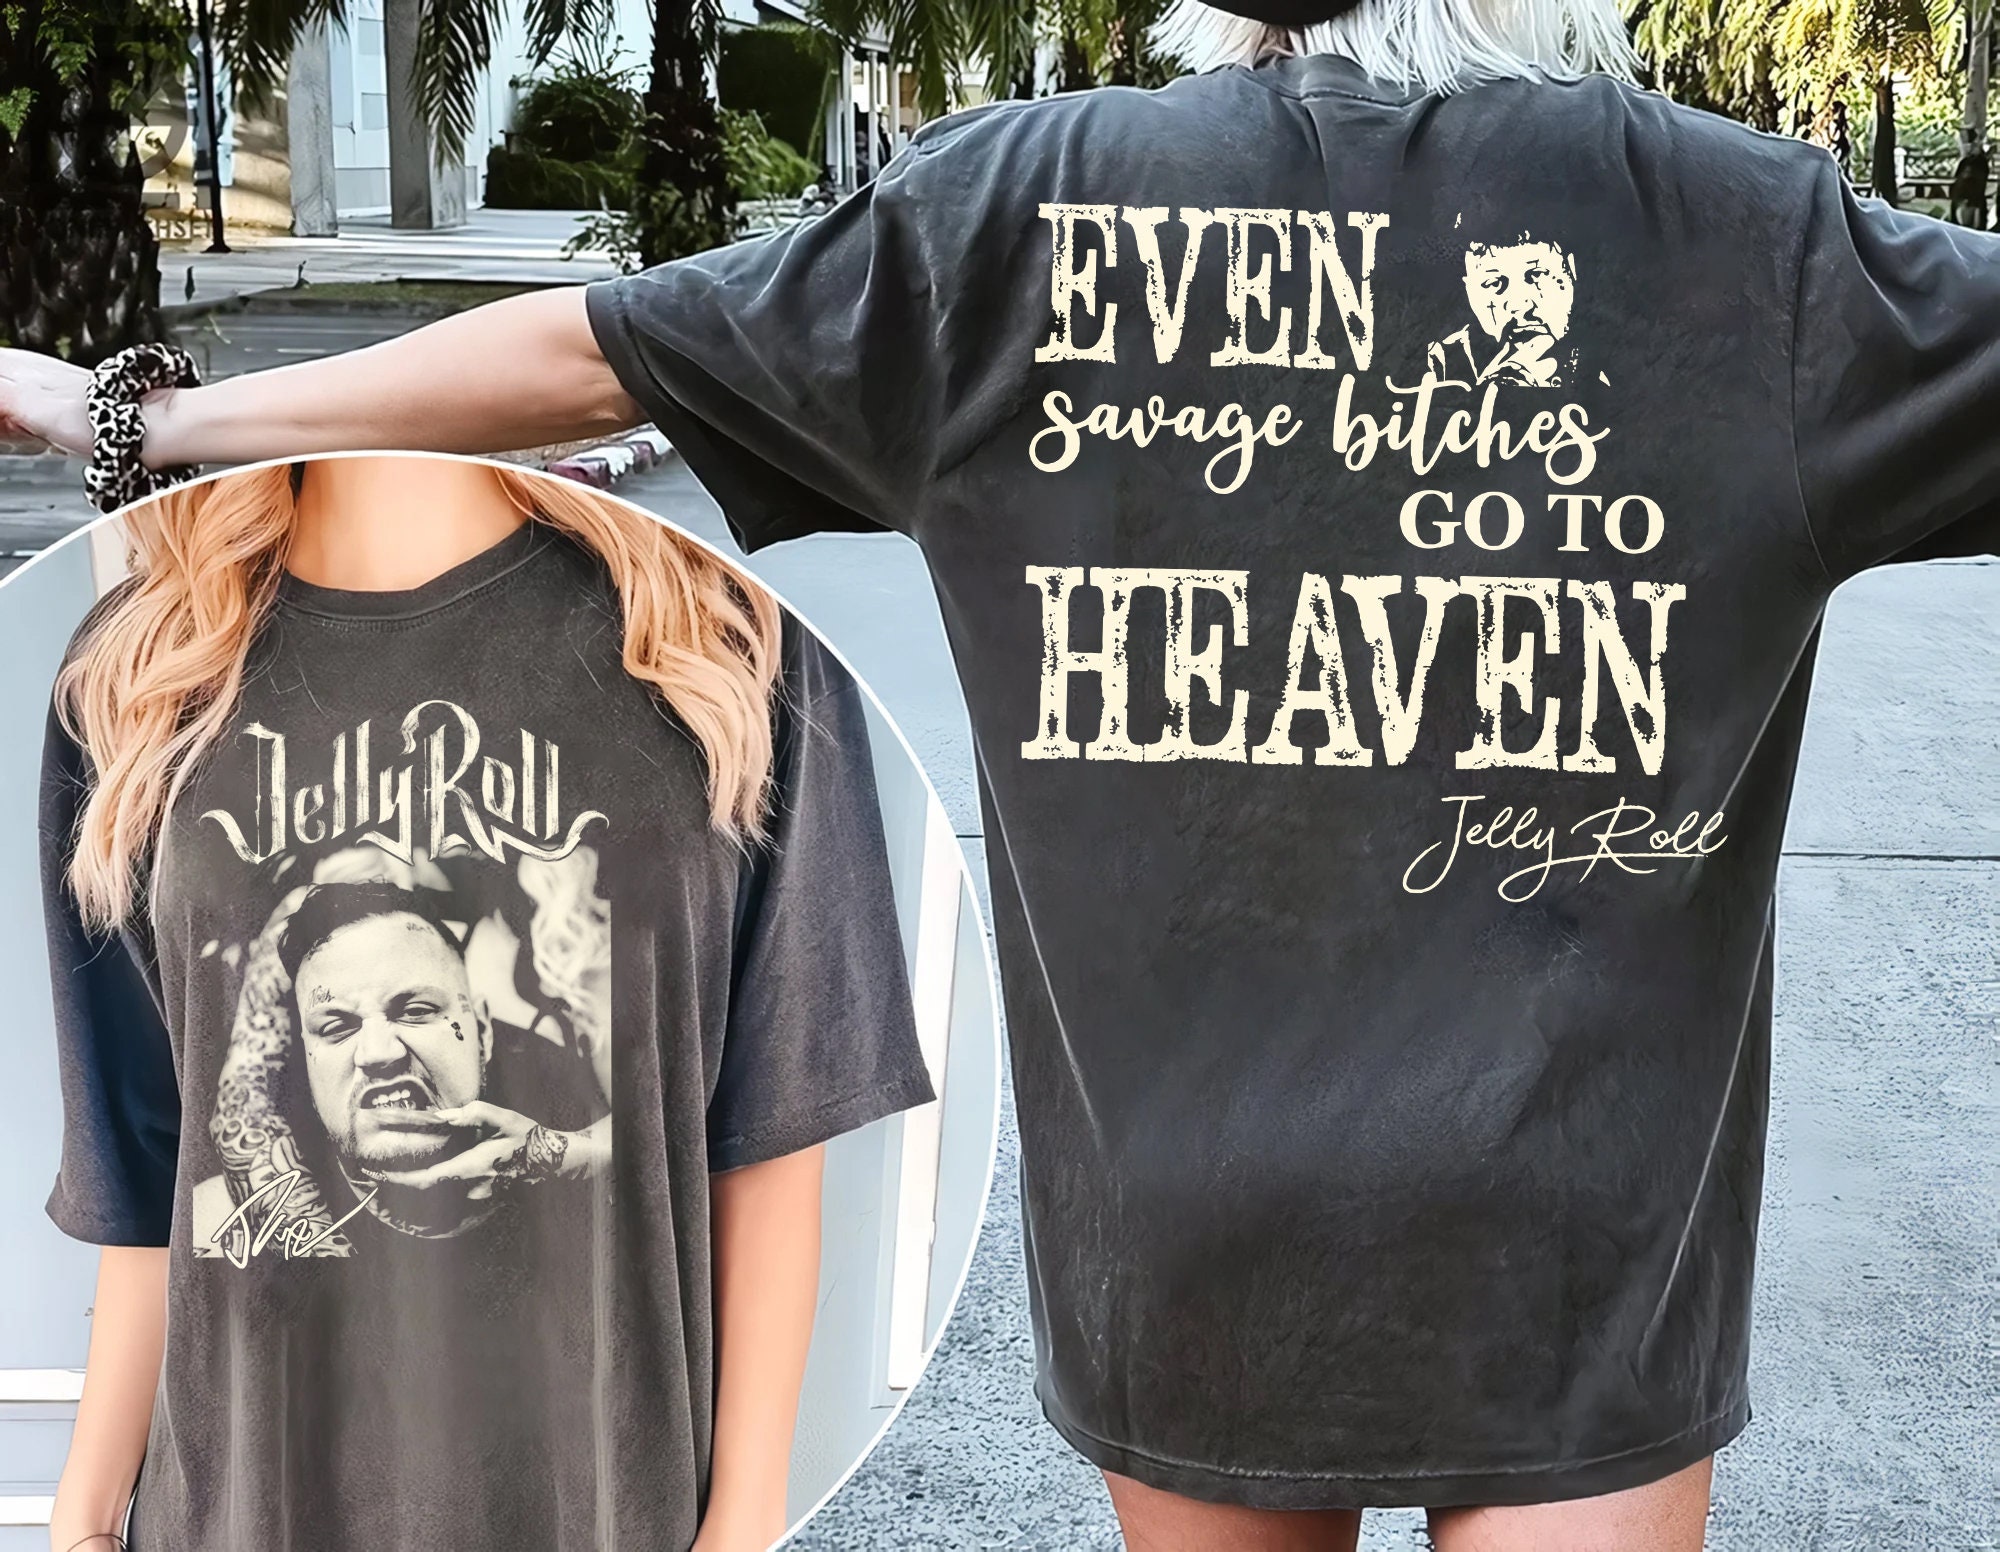 Vintage Jelly Roll The Beautifully Broken Tour 2024 Shirt, Jelly Roll 2024 Concert Shirt, Even Savage Bitches Go to Heaven shirt Unisex